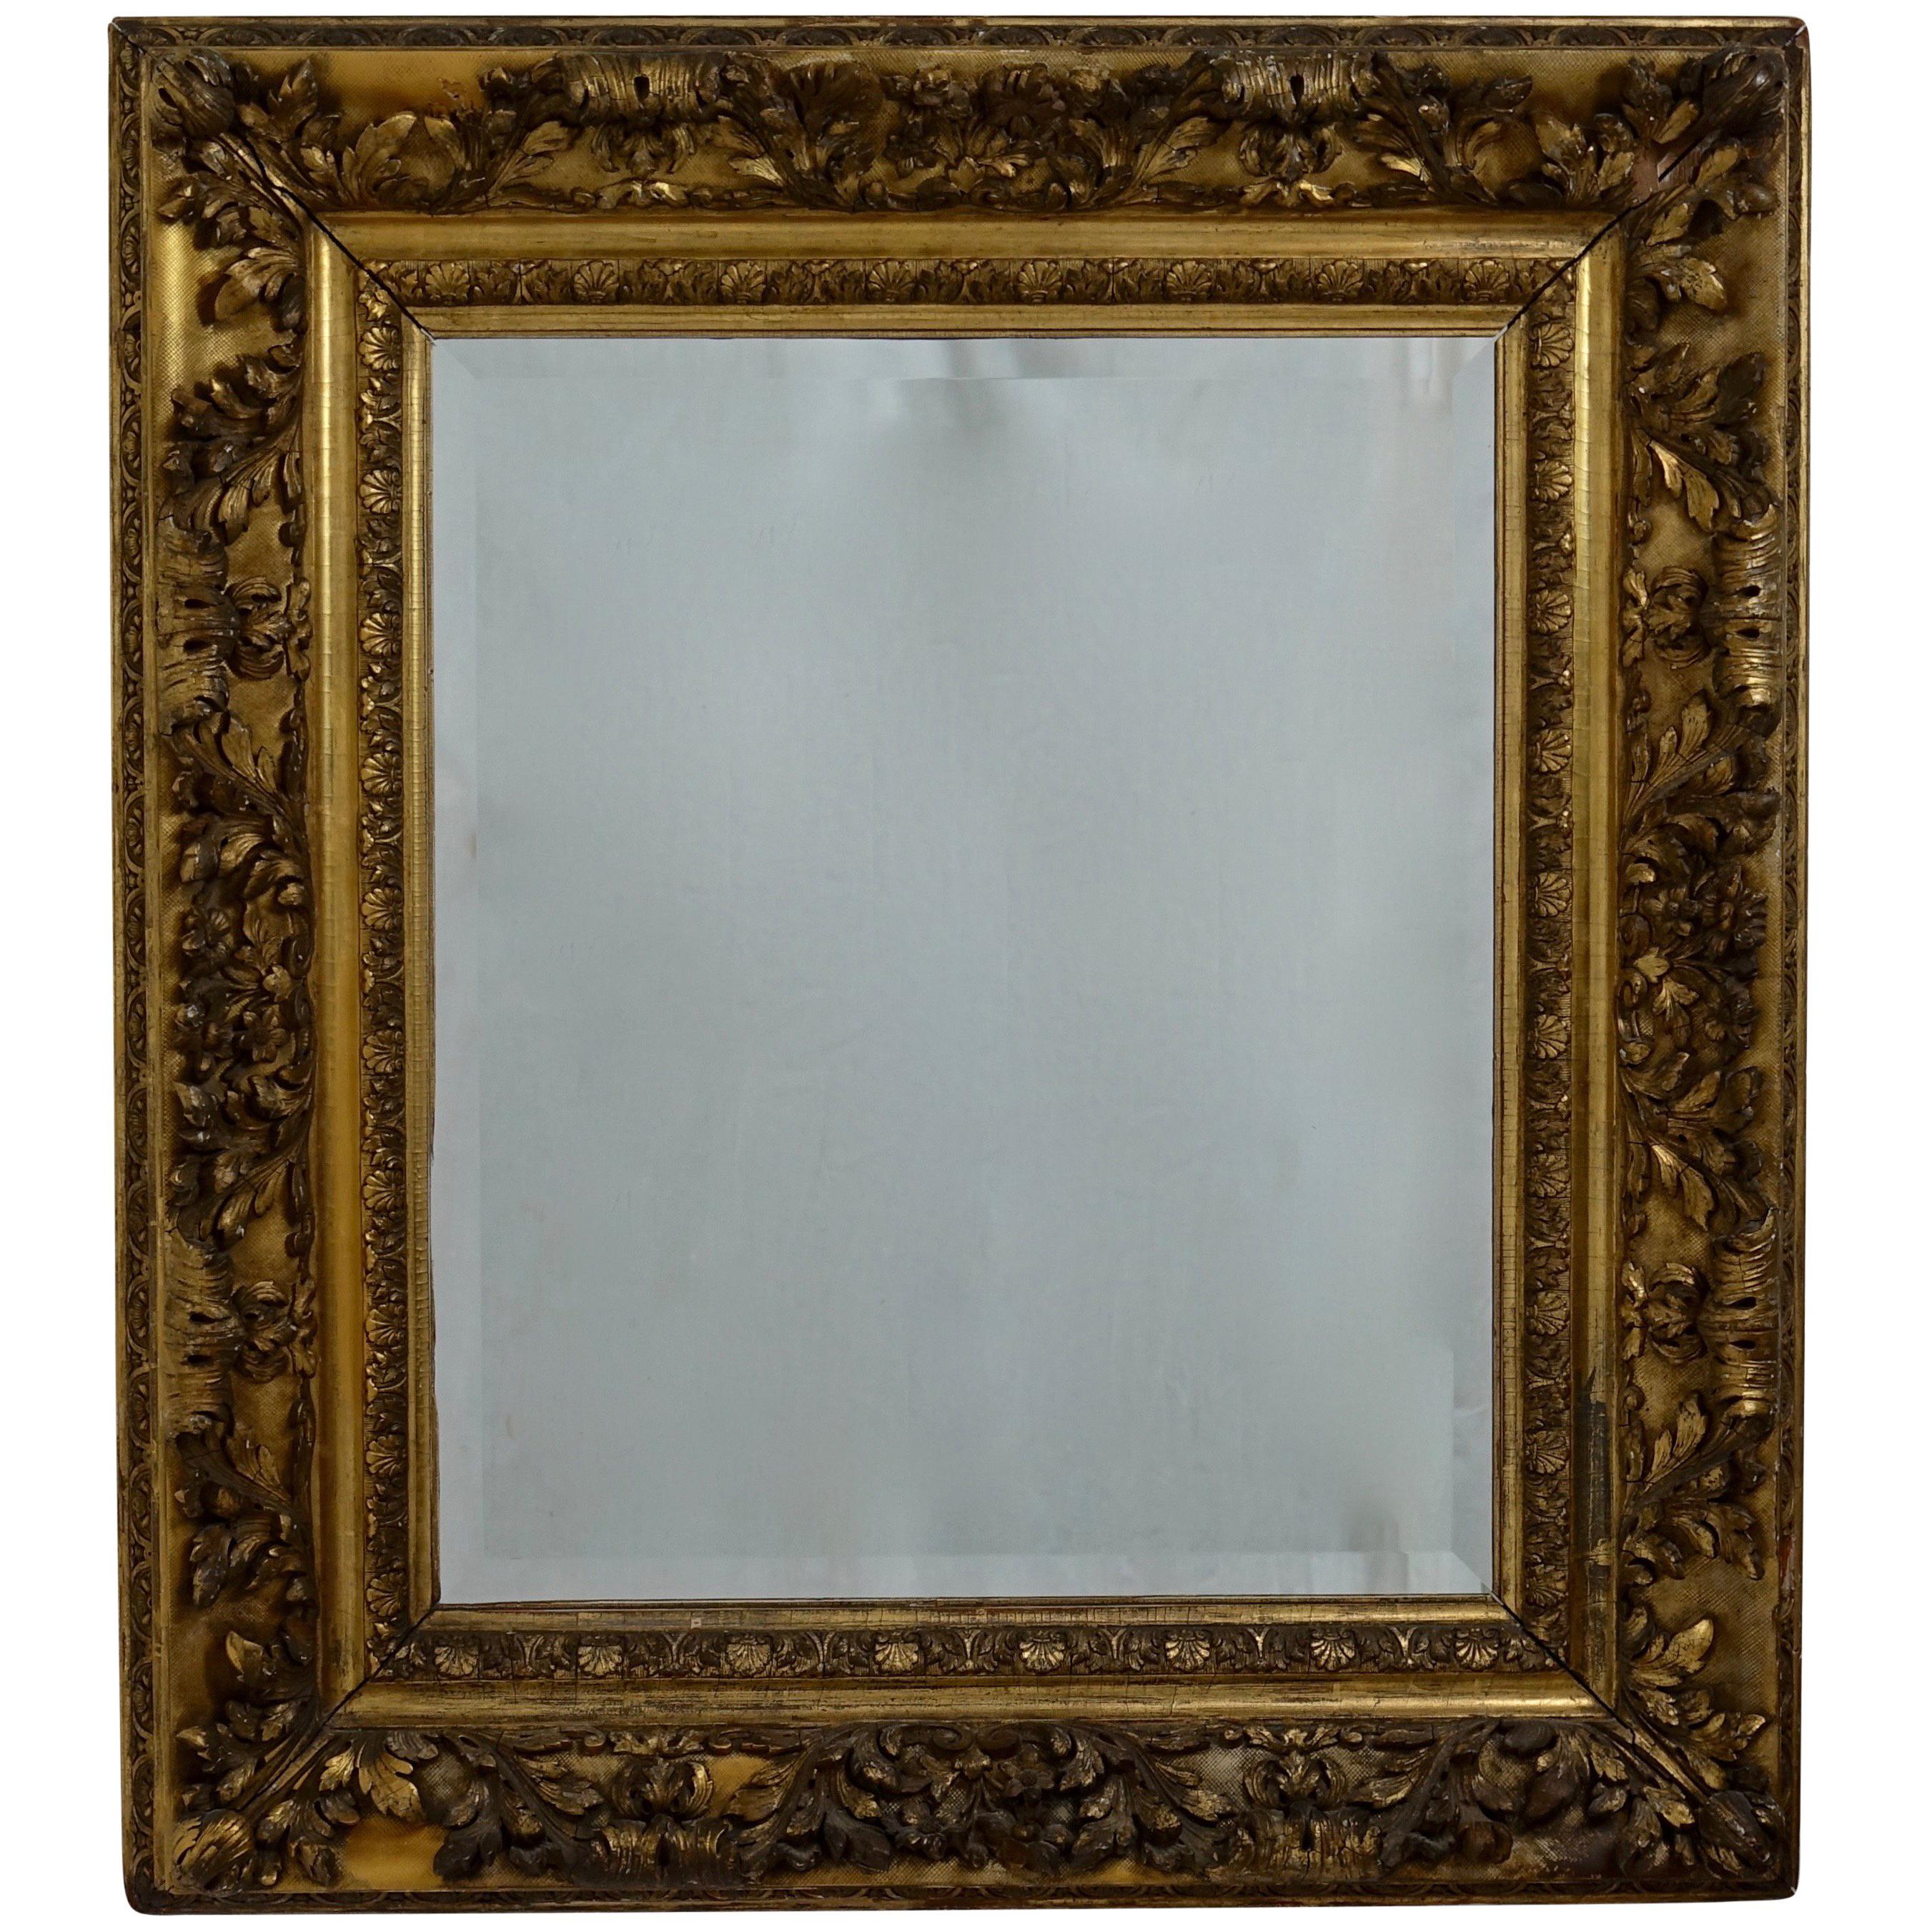 Gesso and Carved Gilt Framed Mirror, English, 19th Century